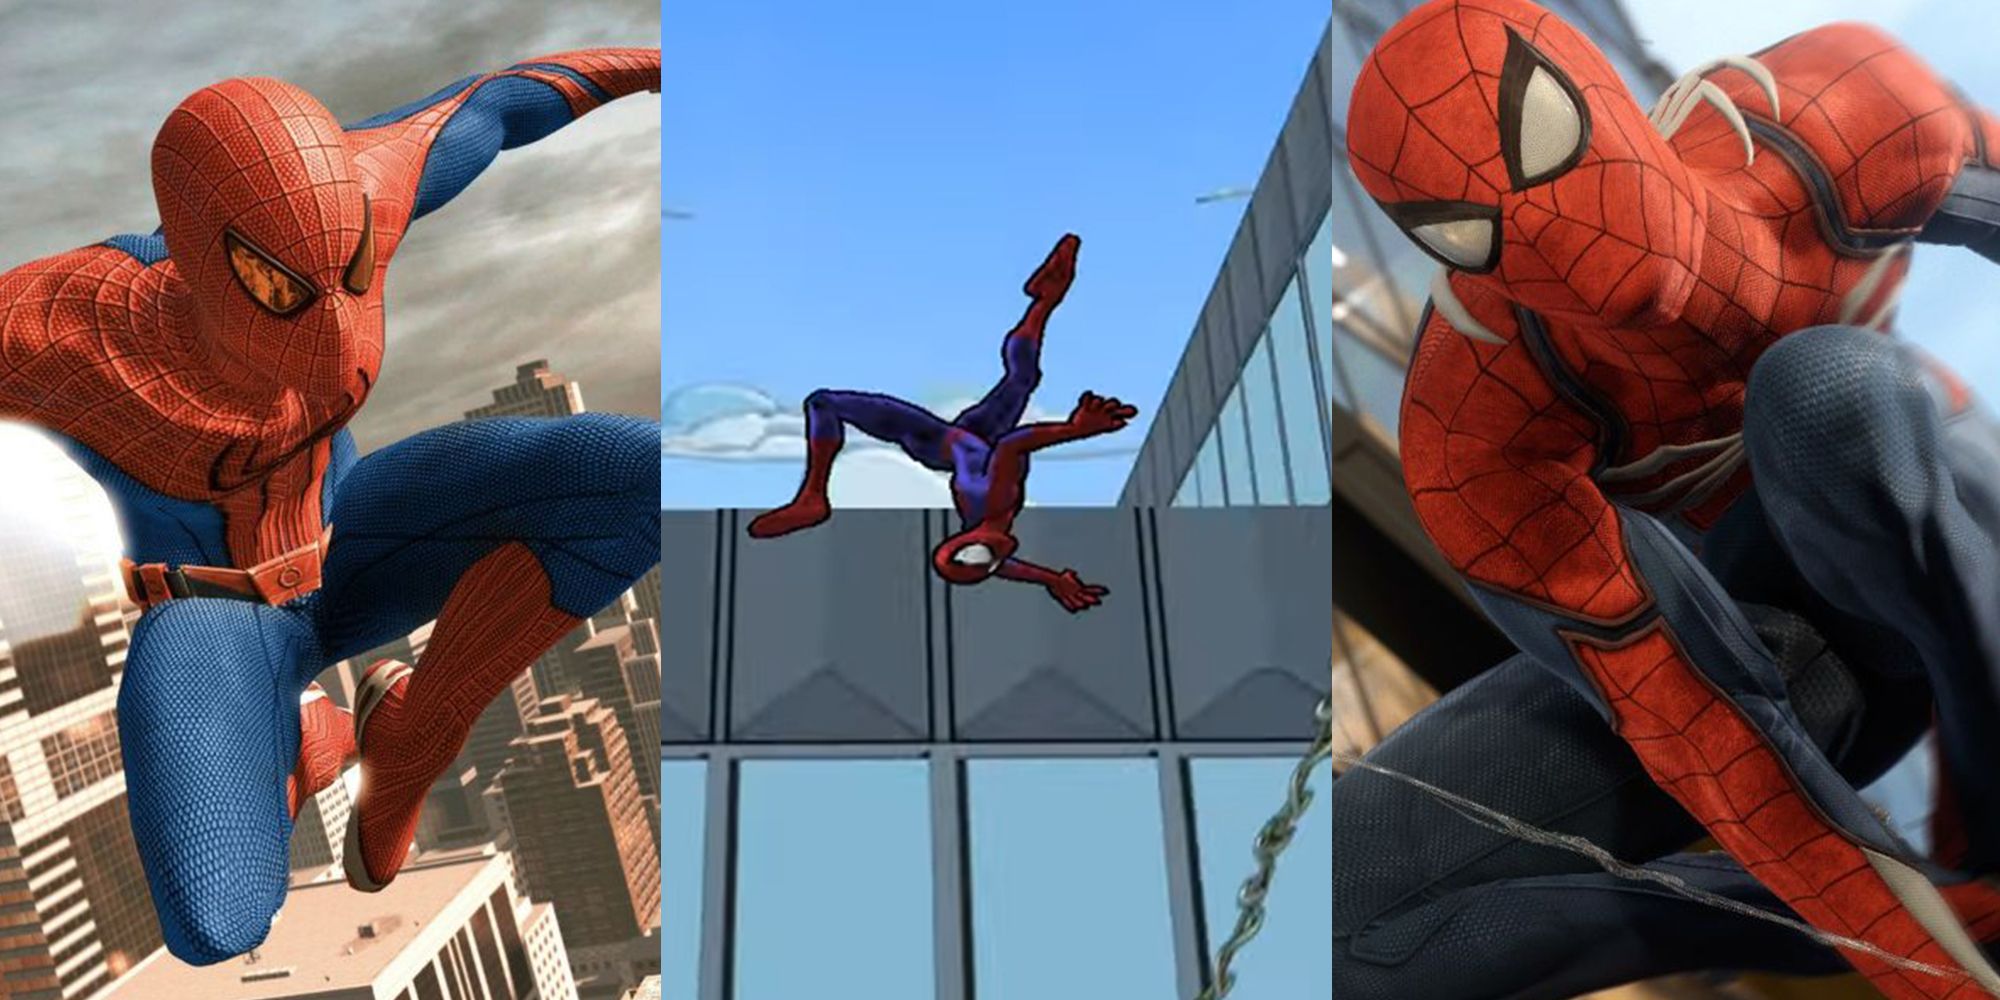 Spider-Man's web-swinging has been adapted in many games with varying success.